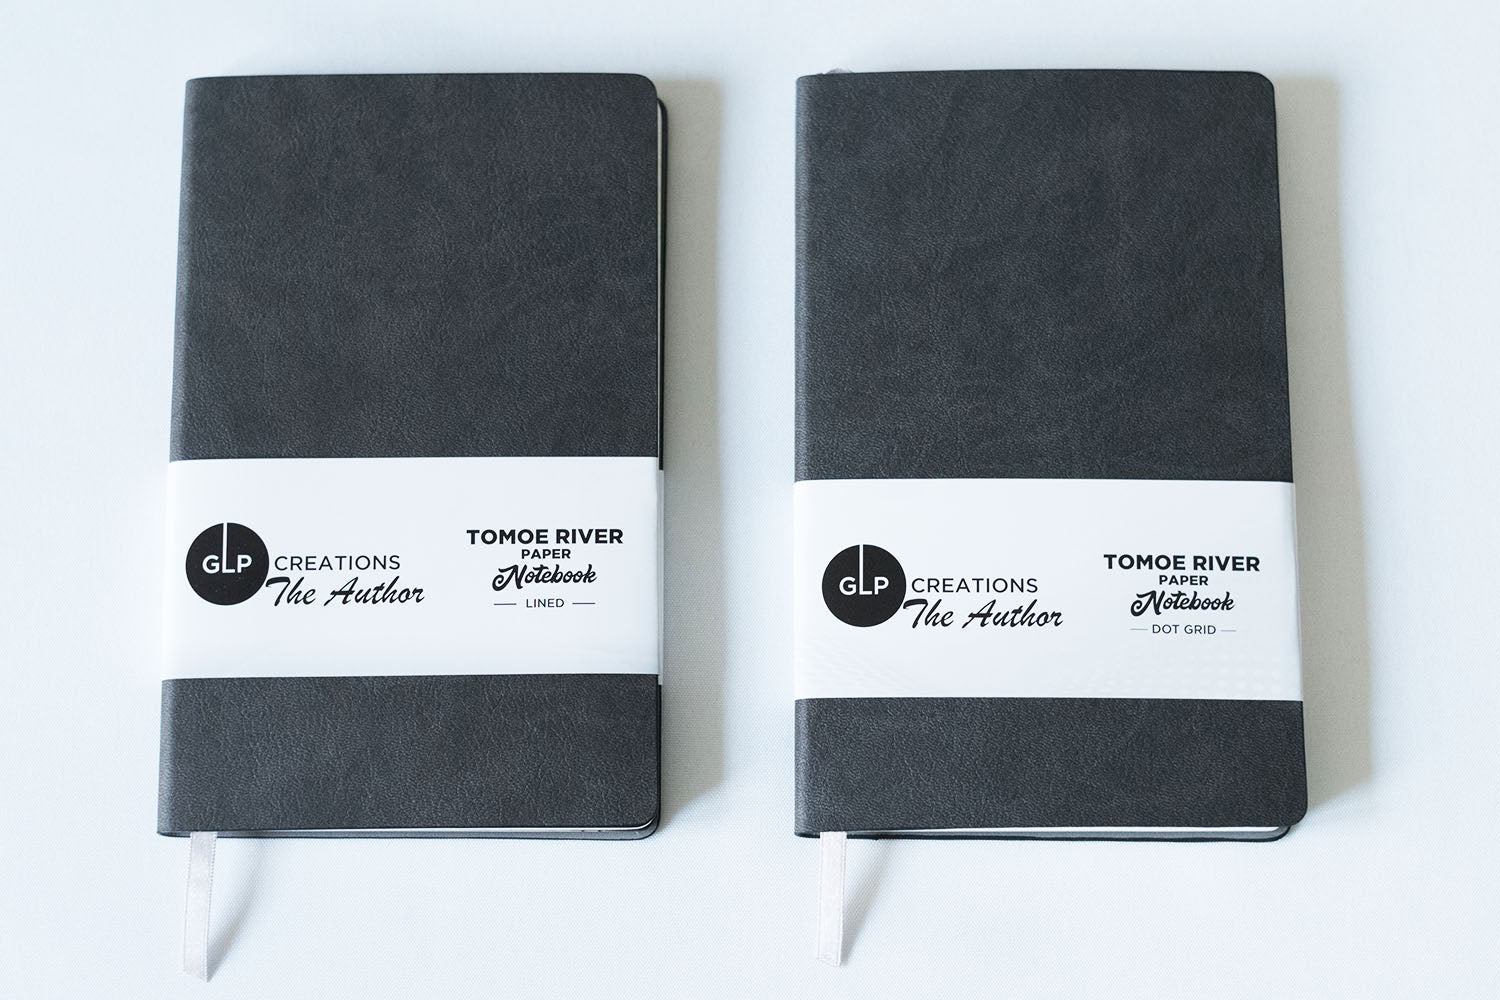 GLP Creations The Author Tomoe River Notebook - Anthracite | Pen Venture - Passionf for Luxury